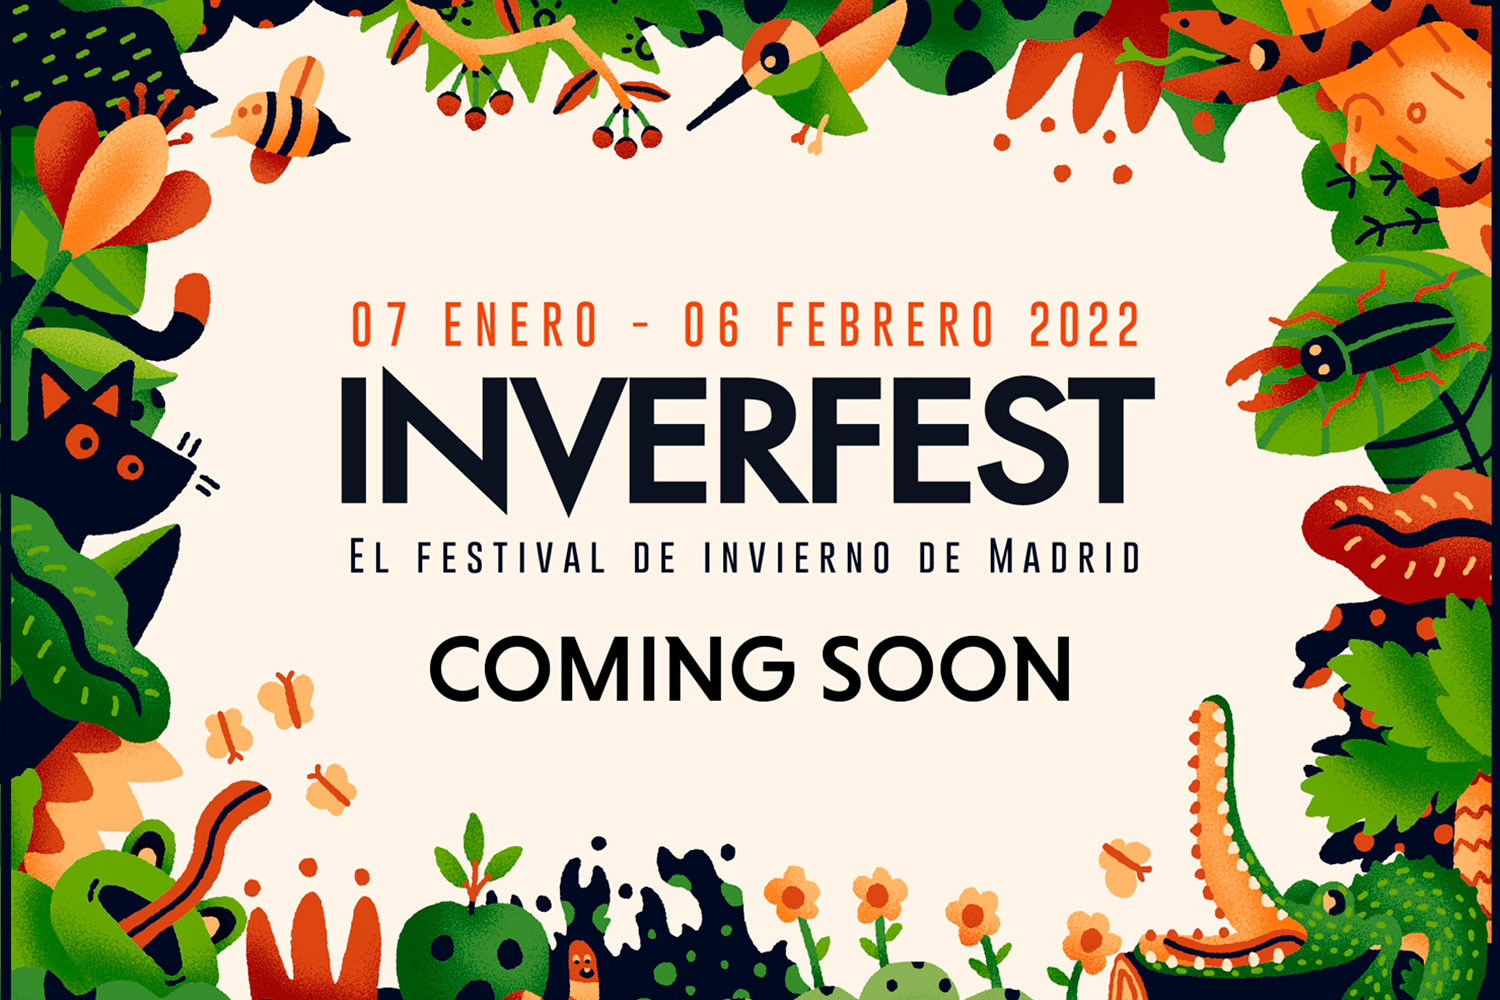 Inverfest, the winter festival in Madrid